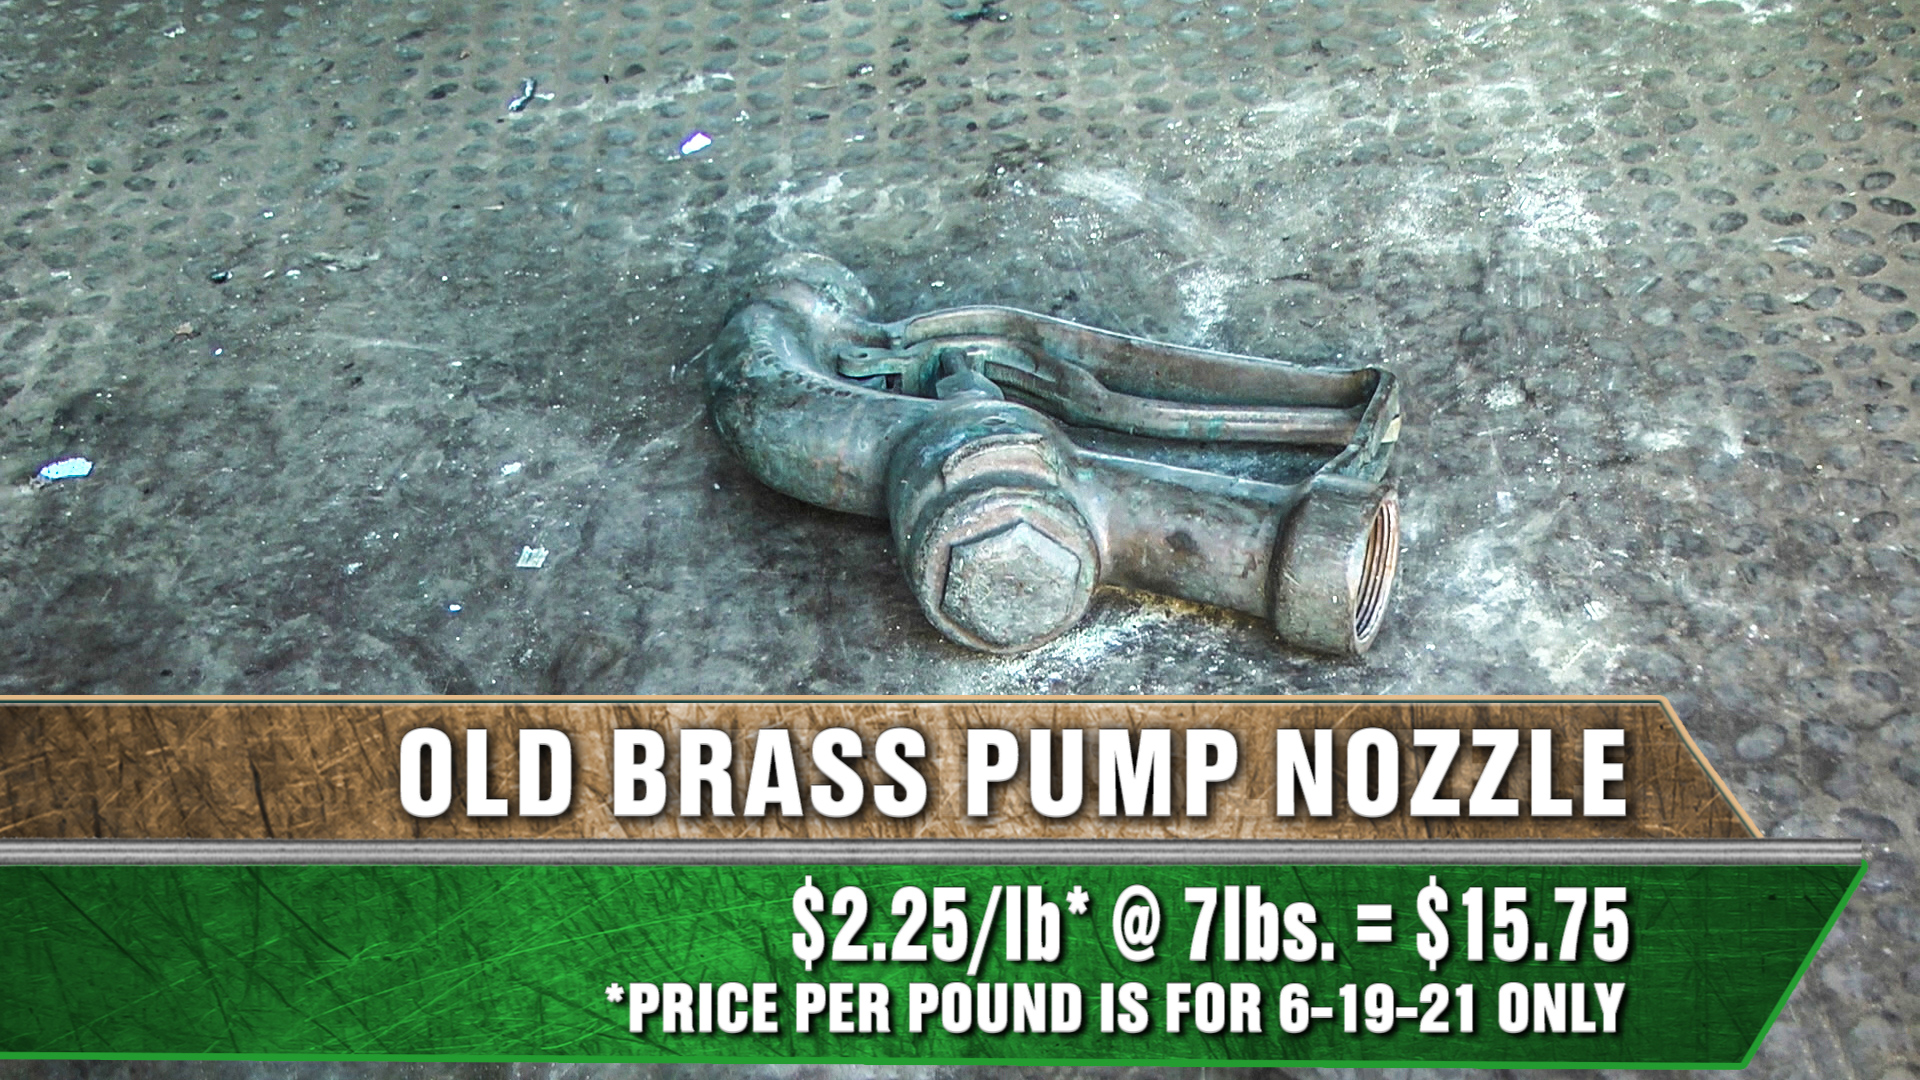 Brass Prices in Philadelphia June July 2021. M Dunn Recycling presents Scrap Metal Philadelphia. Our blog about scrap metal prices. Compared to the last couple years, Brass prices are way up. It's best to call us for a current price 215-624-2420 for prices change sometimes hourly. Plumbers and HVAC technicians, if you've been saving up your scrap. now is a good time to sell it. Prices change day by day even hour by hour so ALWAYS call for prices.  